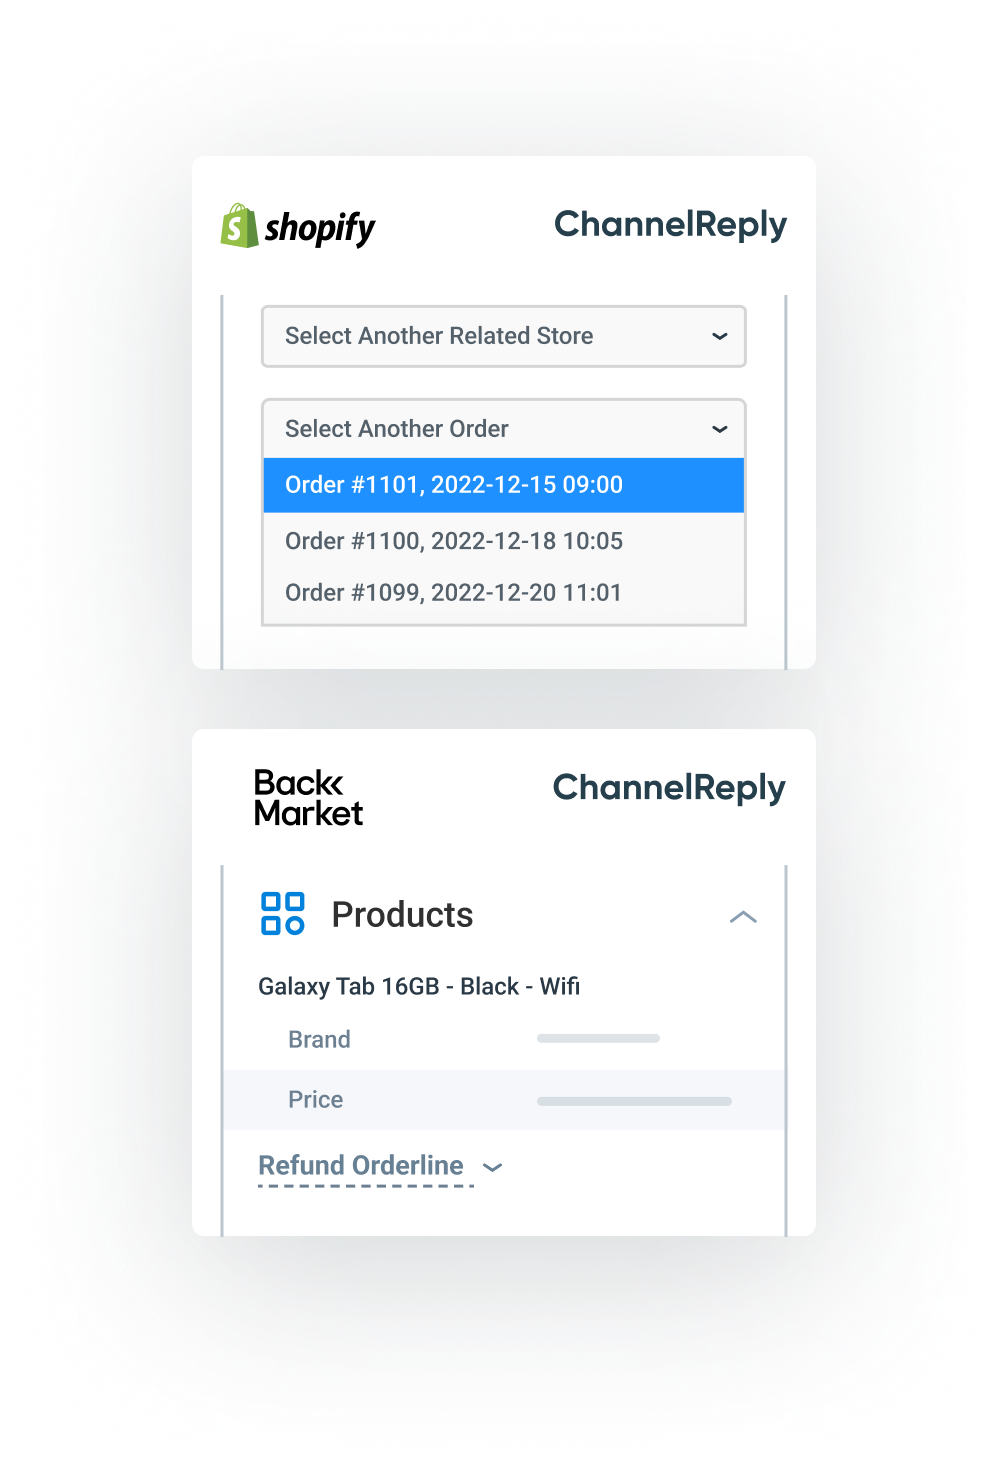 Illustrations of Selecting Another Shopify Order and Viewing Back Market Product Data with ChannelReply